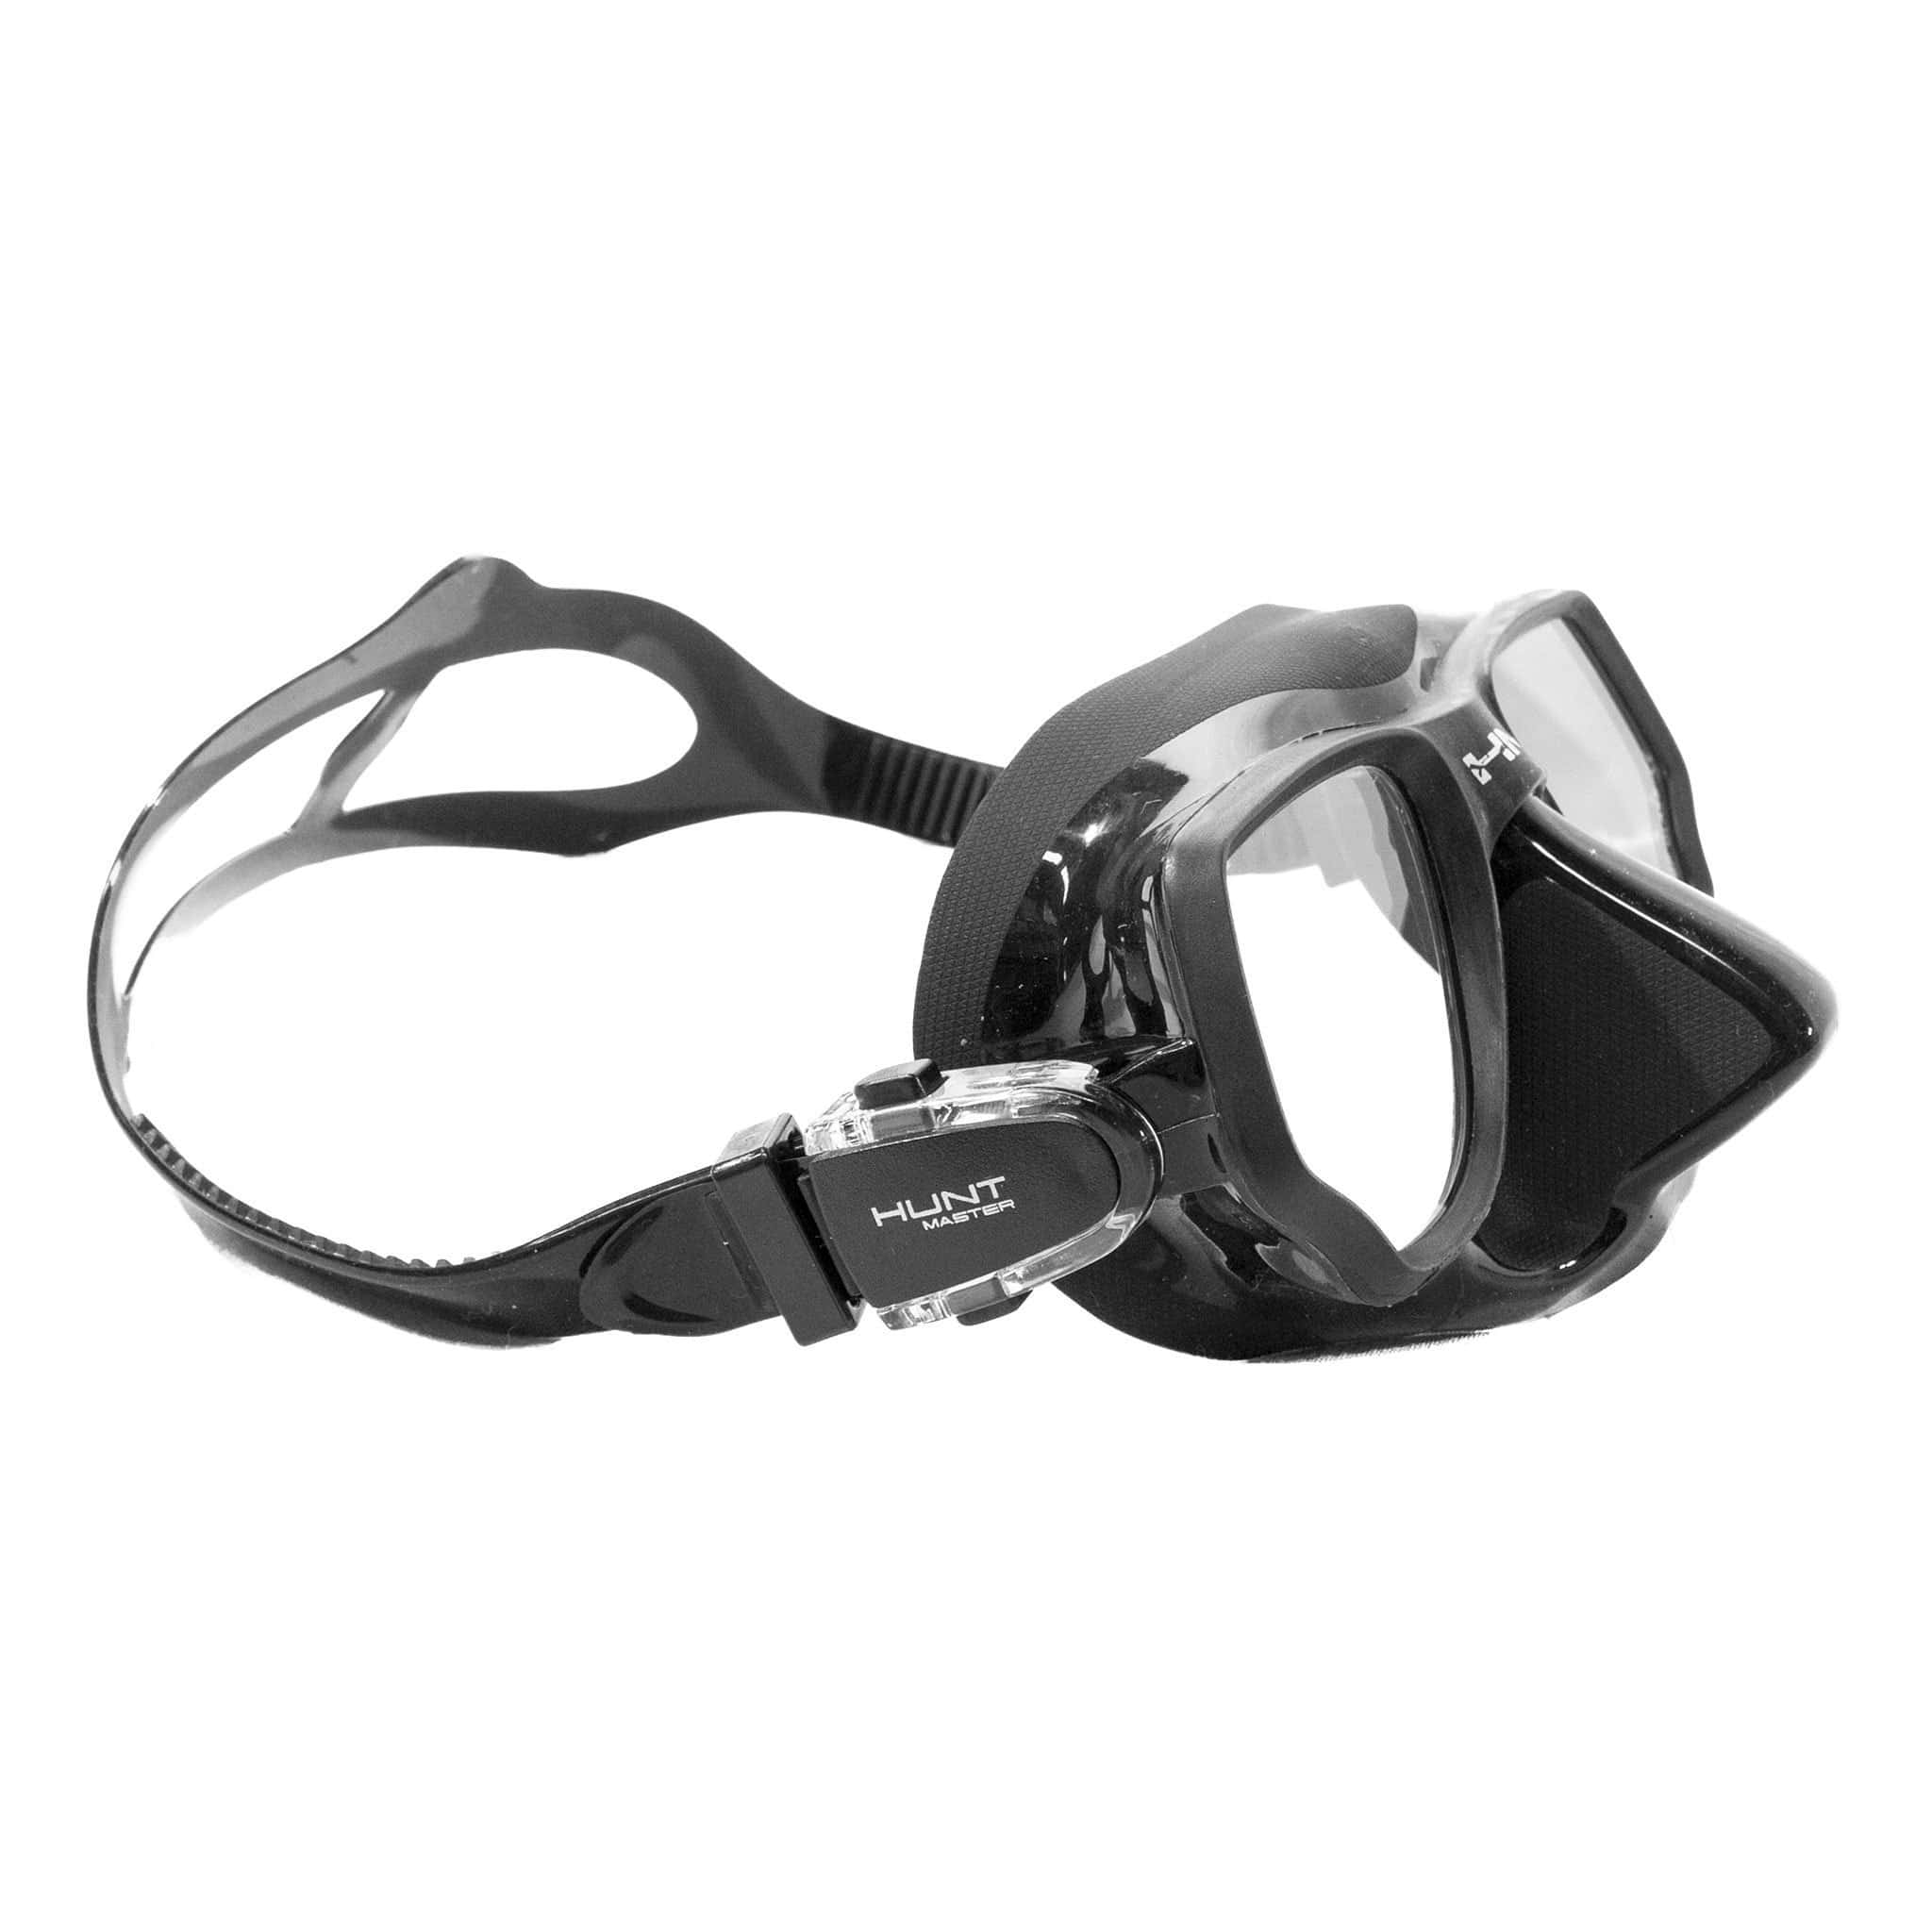 HuntMaster Low Volume Diving Mask Black Fish (Magura) - With Complimentary Black Container